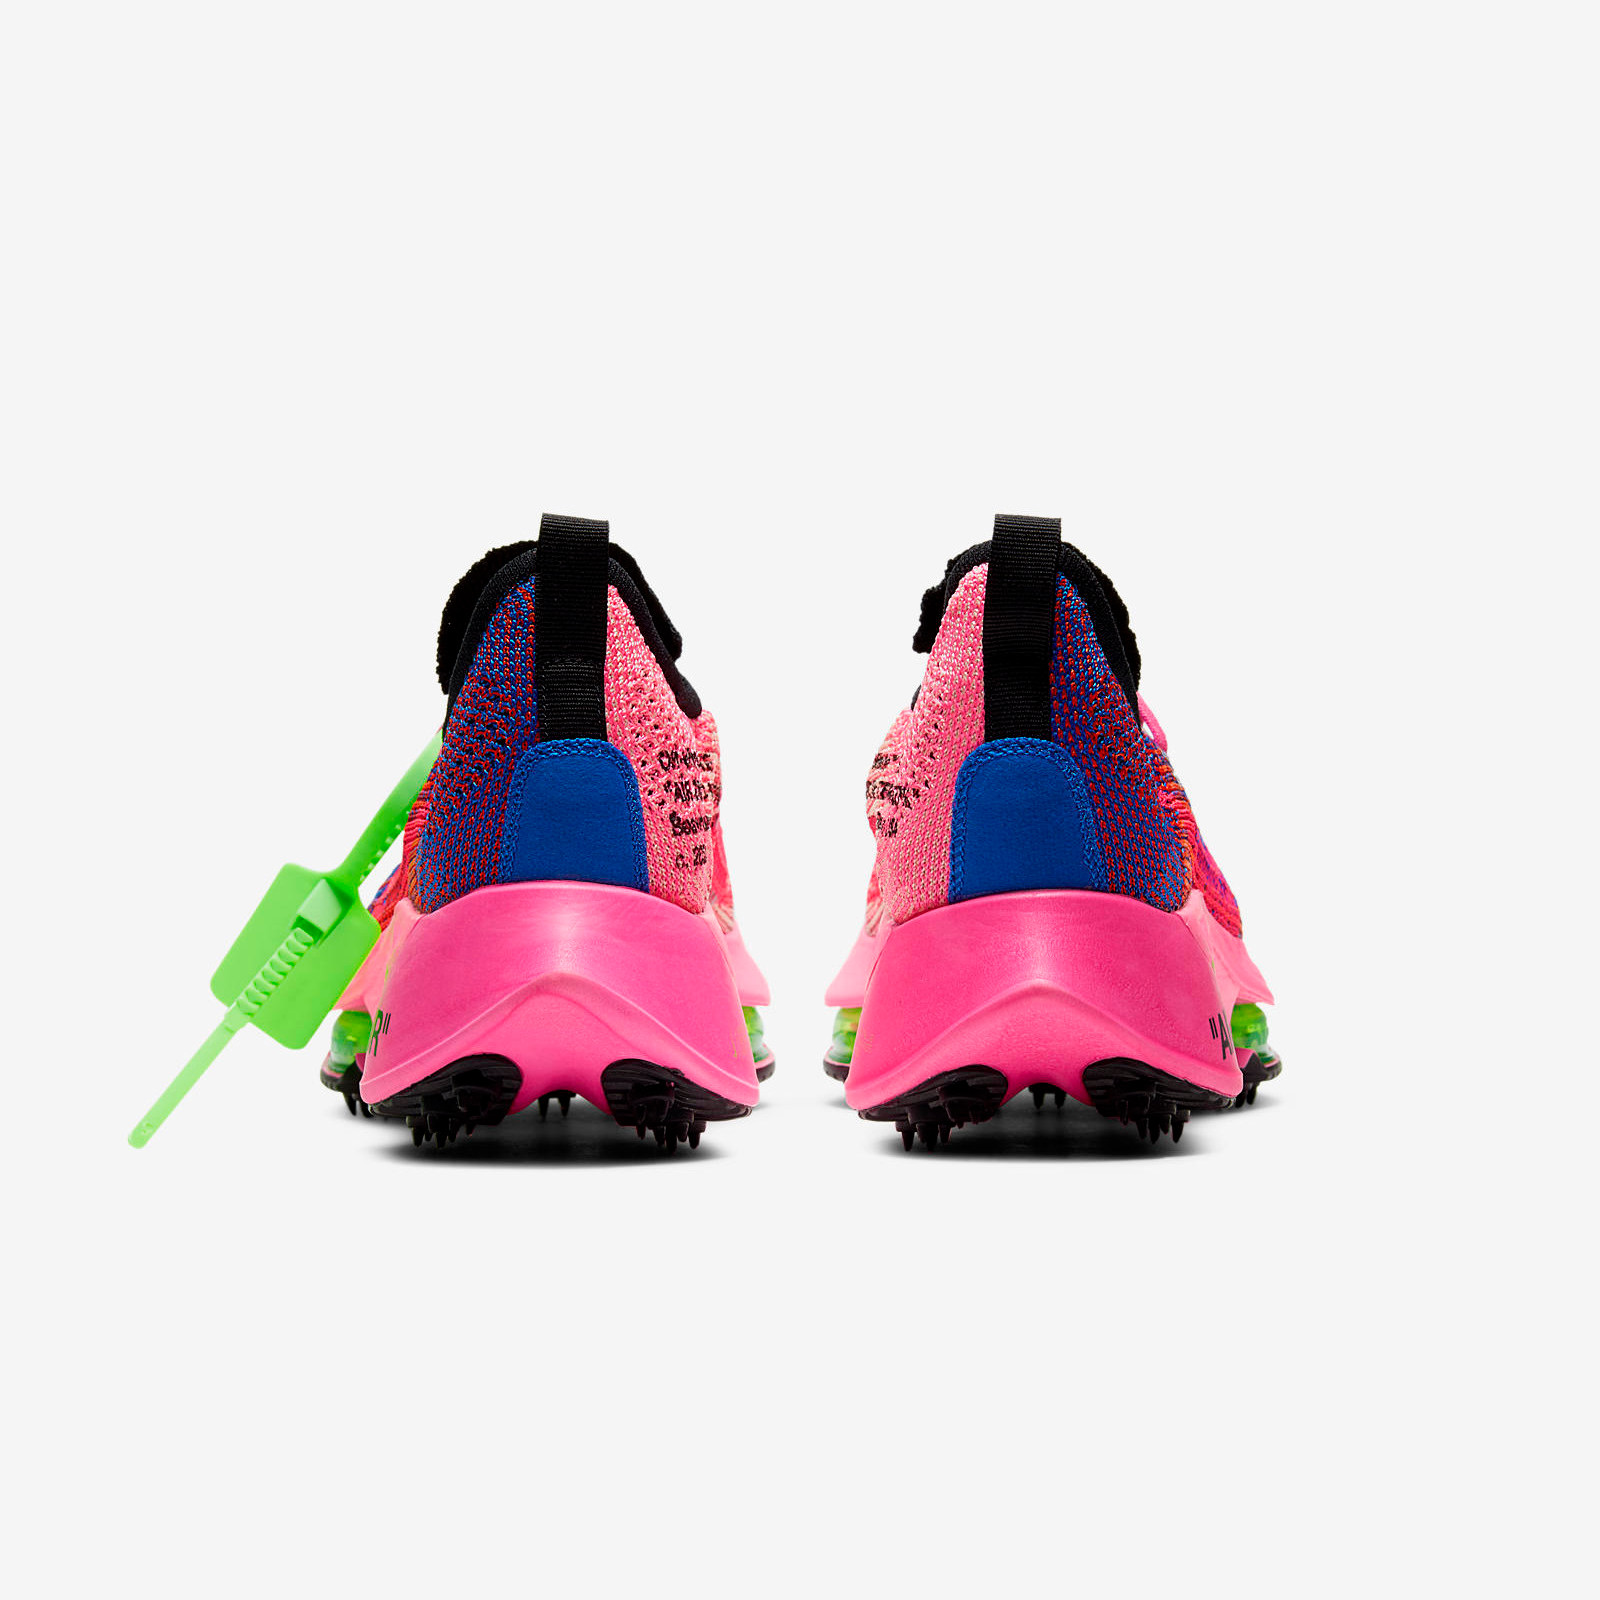 Off-White x Nike
Air Zoom Tempo
NEXT% Pink